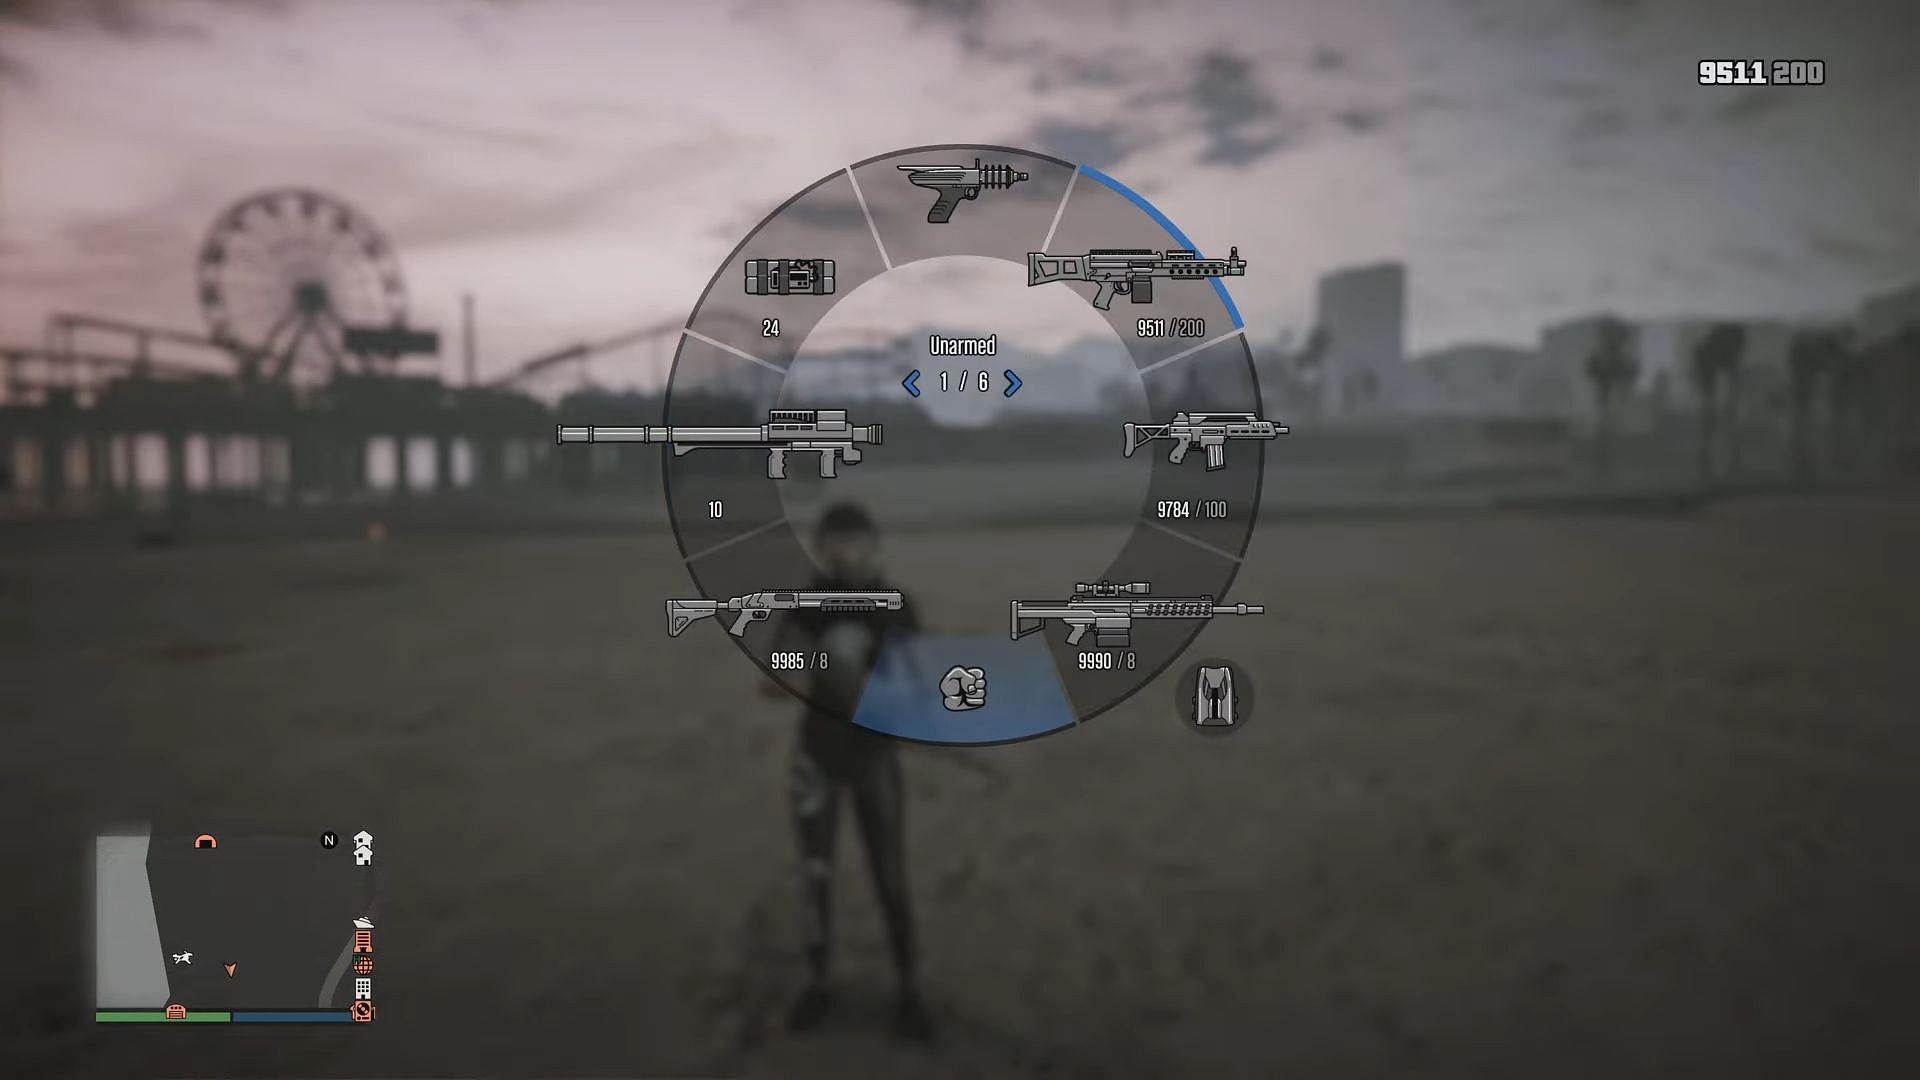 Weapon switching is about to look refreshing when switching weapons. (Image via YouTube/ATA DBEST)